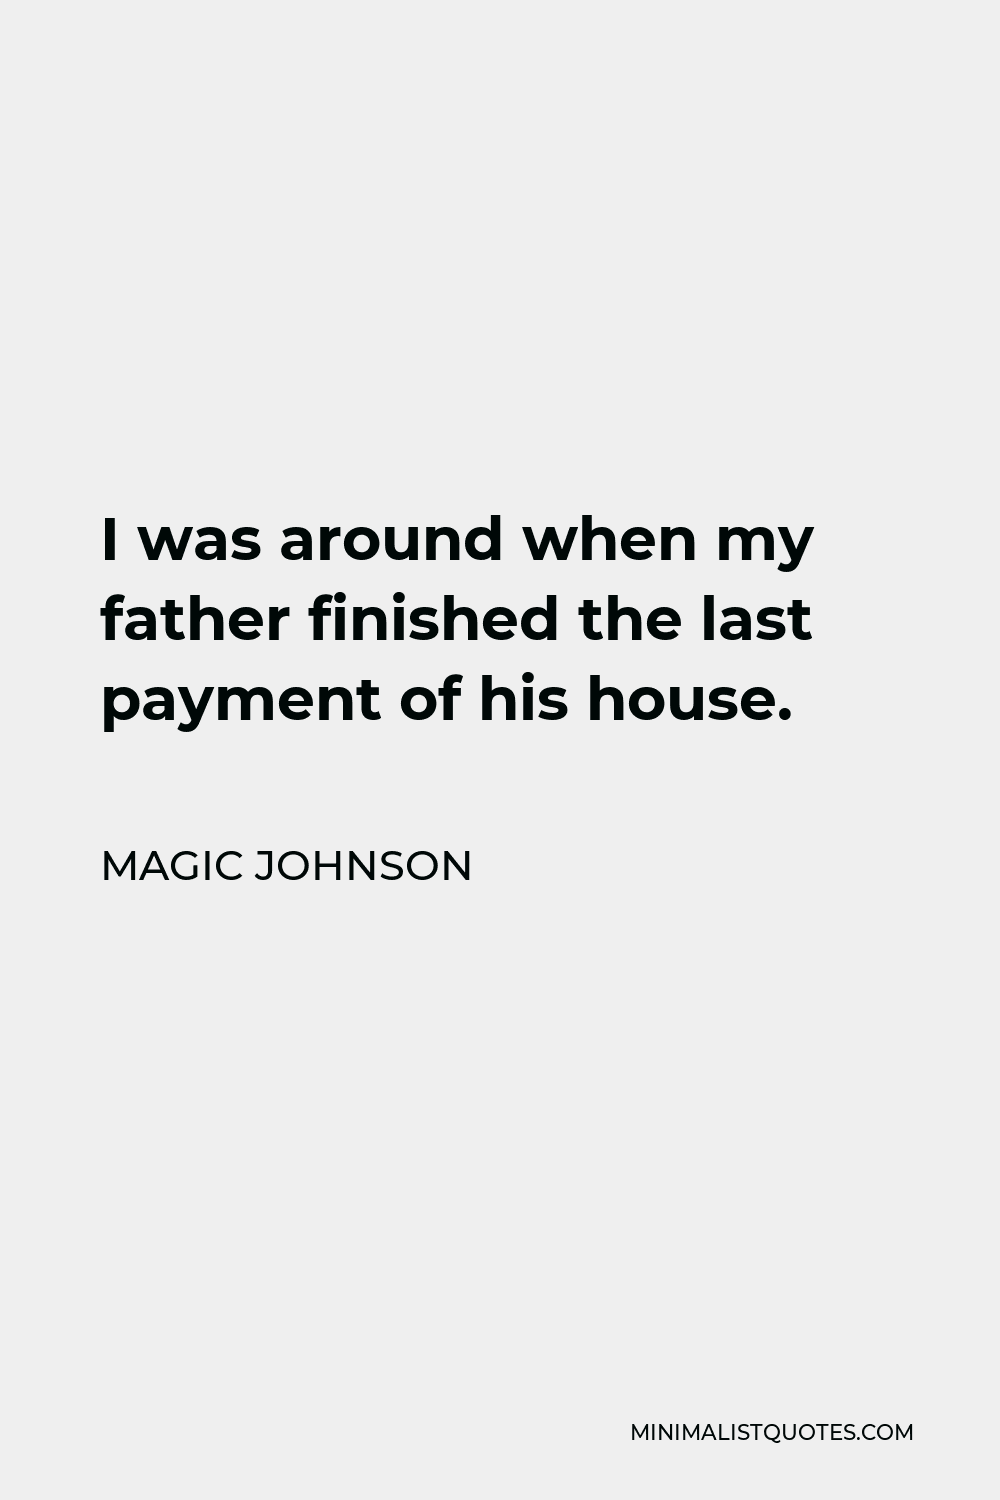 Magic Johnson Quote - I was around when my father finished the last payment of his house.